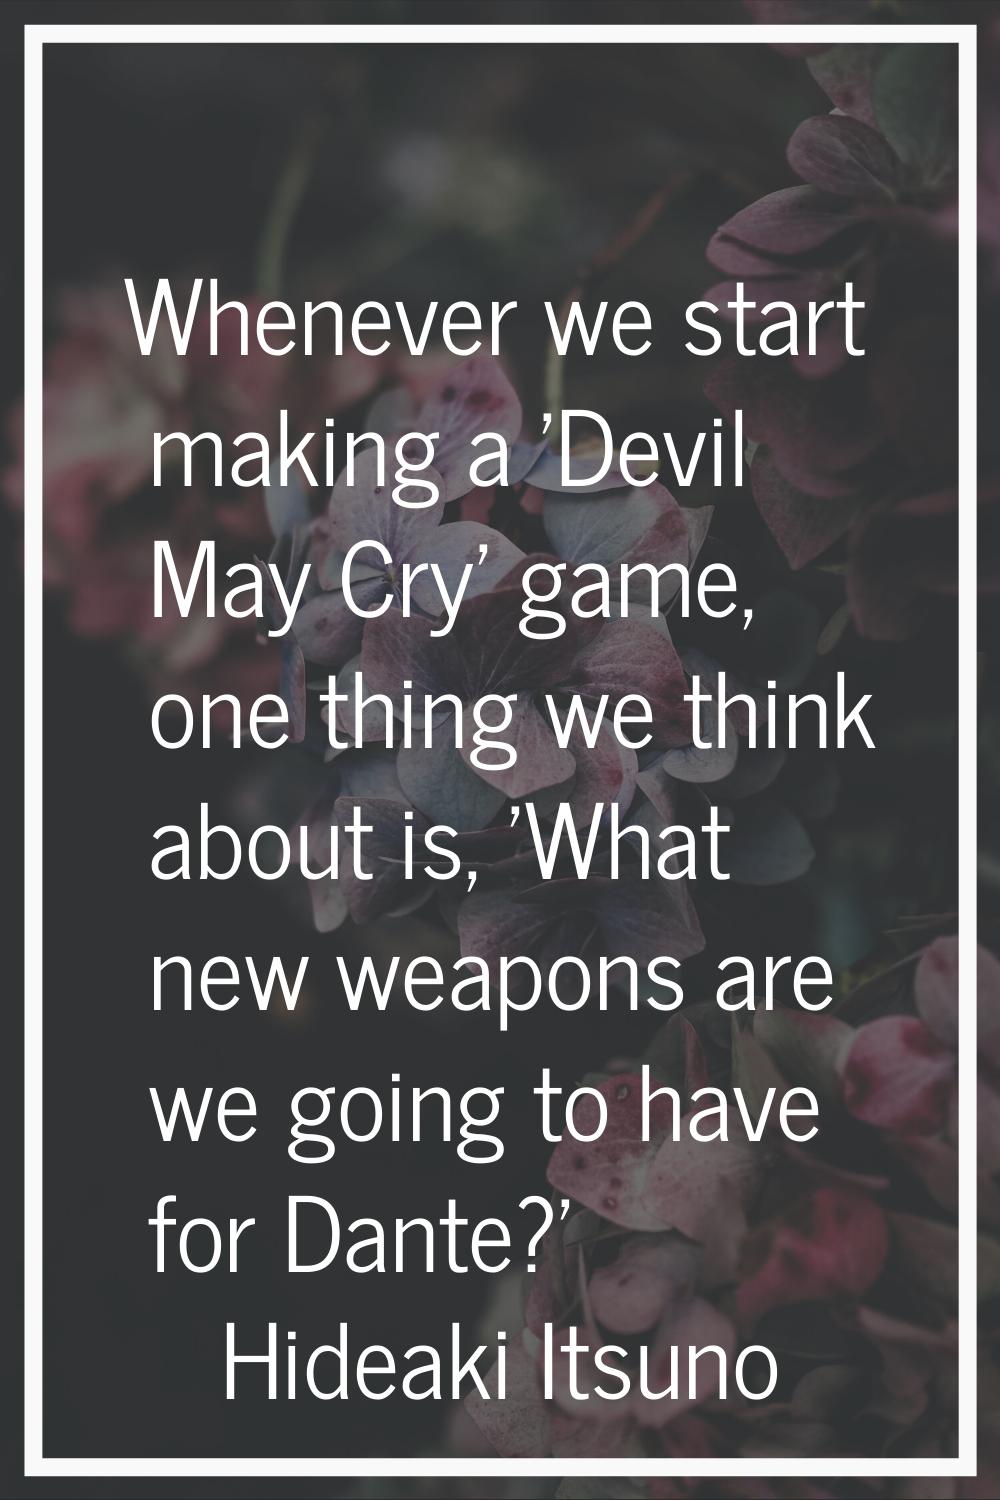 Whenever we start making a 'Devil May Cry' game, one thing we think about is, 'What new weapons are